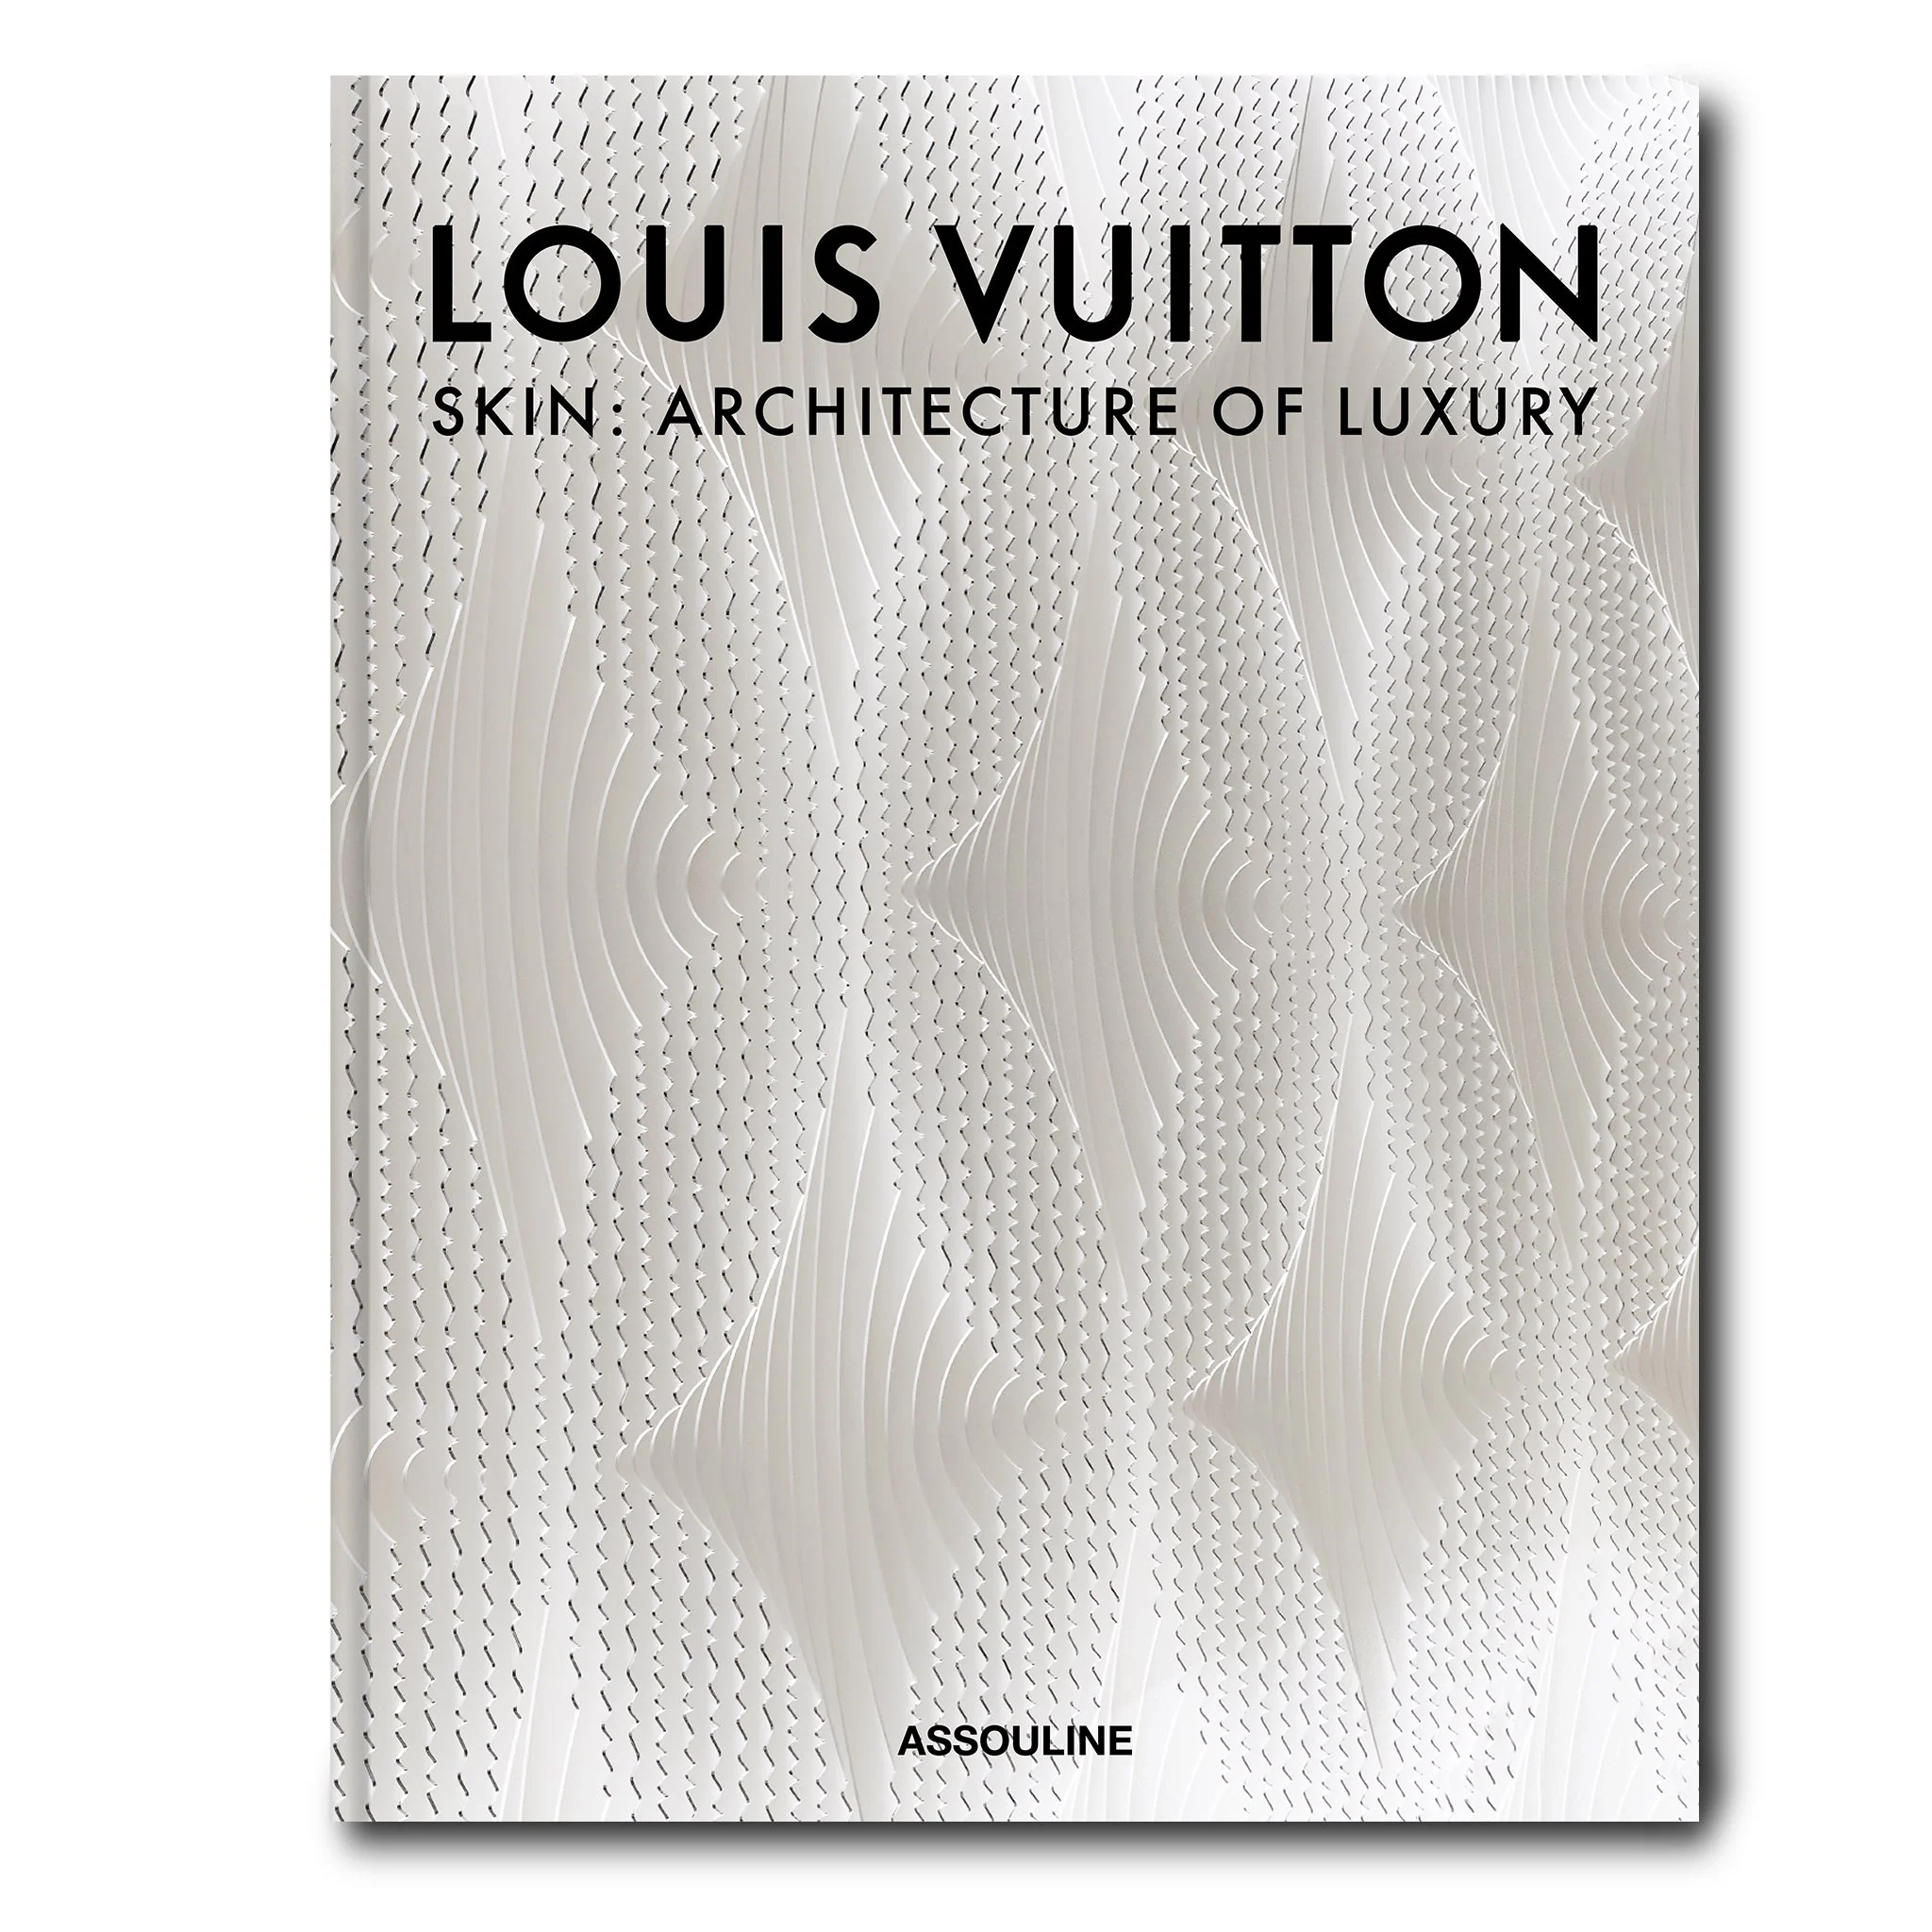 Modern Luxury Interiors op Instagram : Written by Pulitzer Prize-winning  author Paul Goldberger, Louis Vuitton has released a gorgeous volume named “Louis  Vuitton Skin: The Architecture of Luxury,” which explores the façades